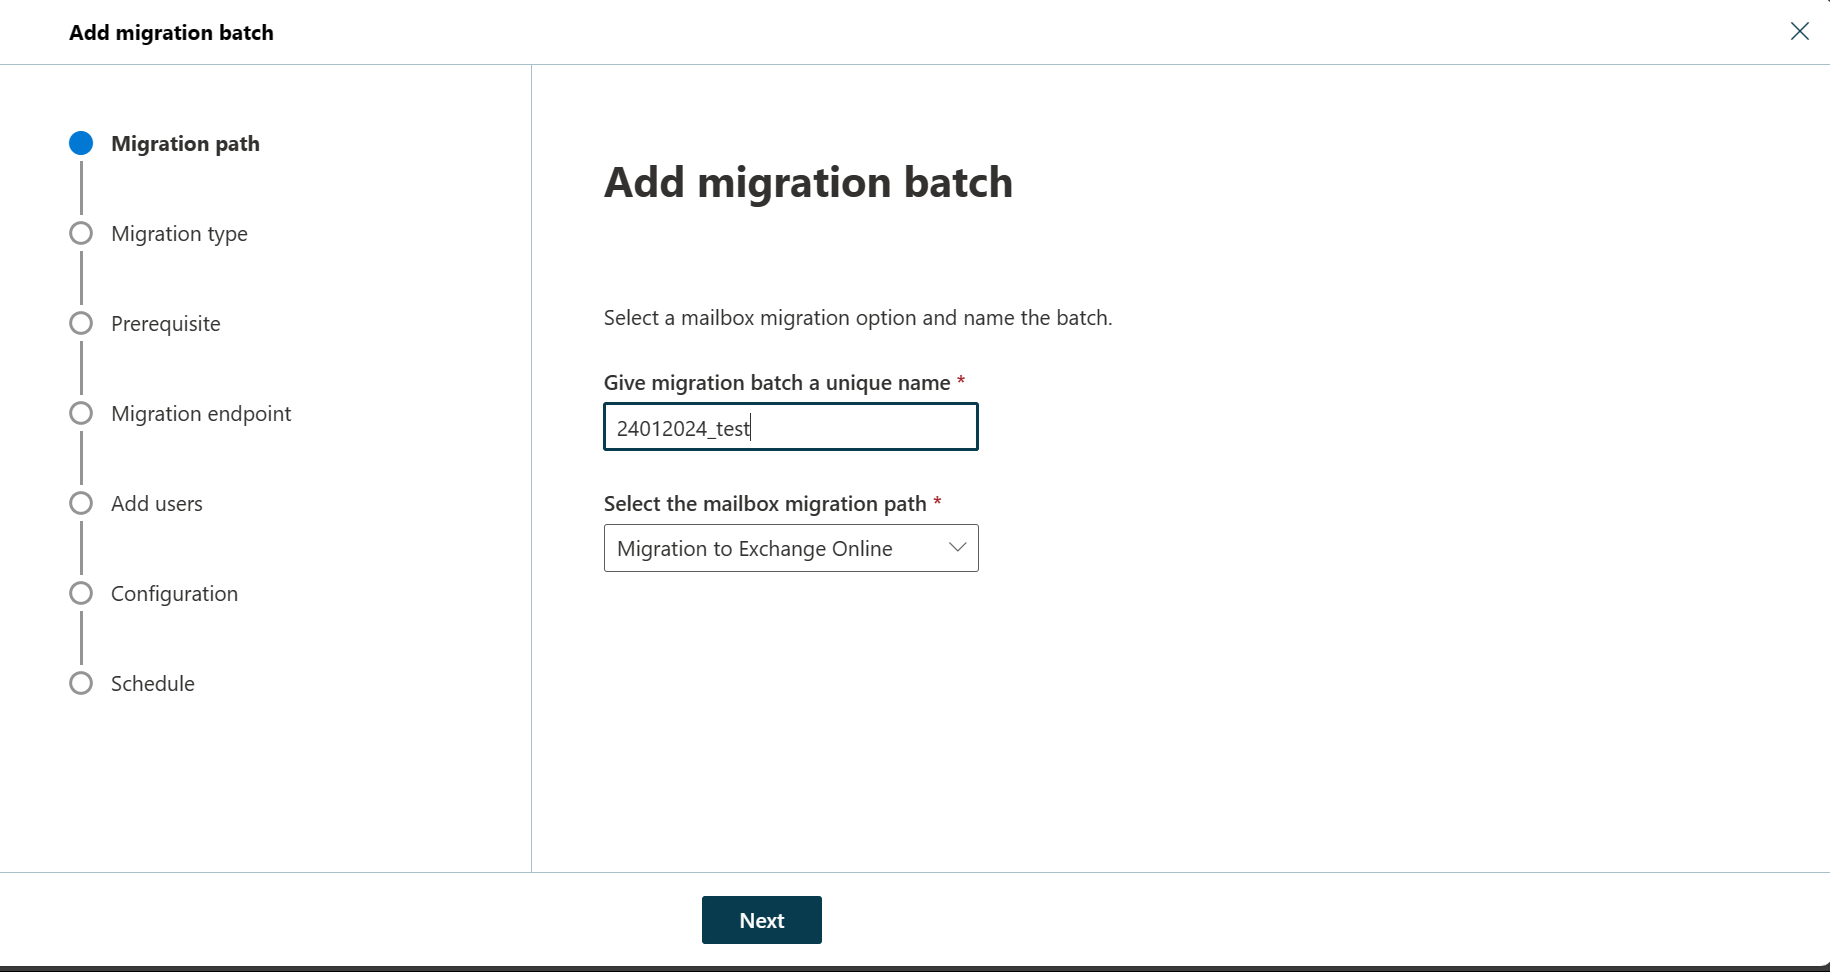 Screenshot of migration wizard that shows the Add migration batch page where the user can specify a unique batch name and select mailbox migration path.